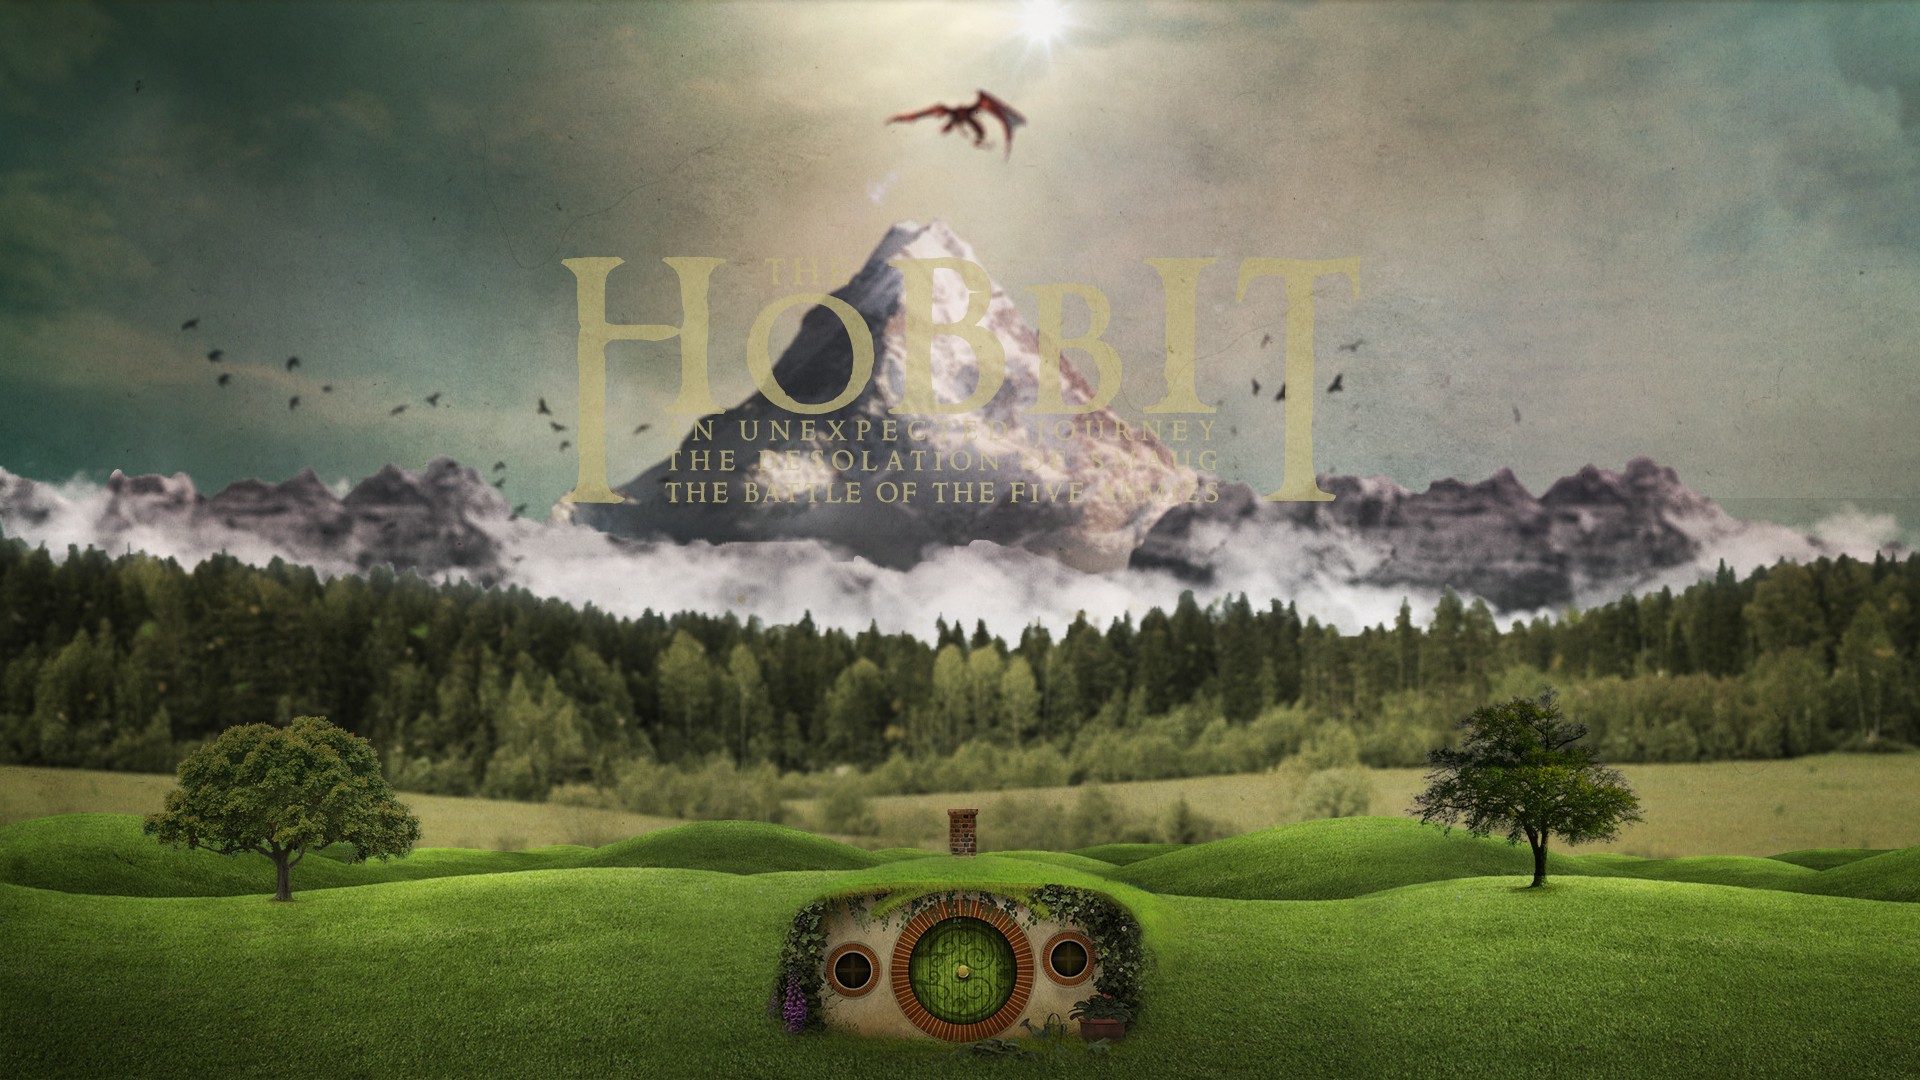 The Hobbit The Hobbit The Battle Of The Five Armies The Hobbit The Desolation Of Smaug The Hobbit An 1920x1080